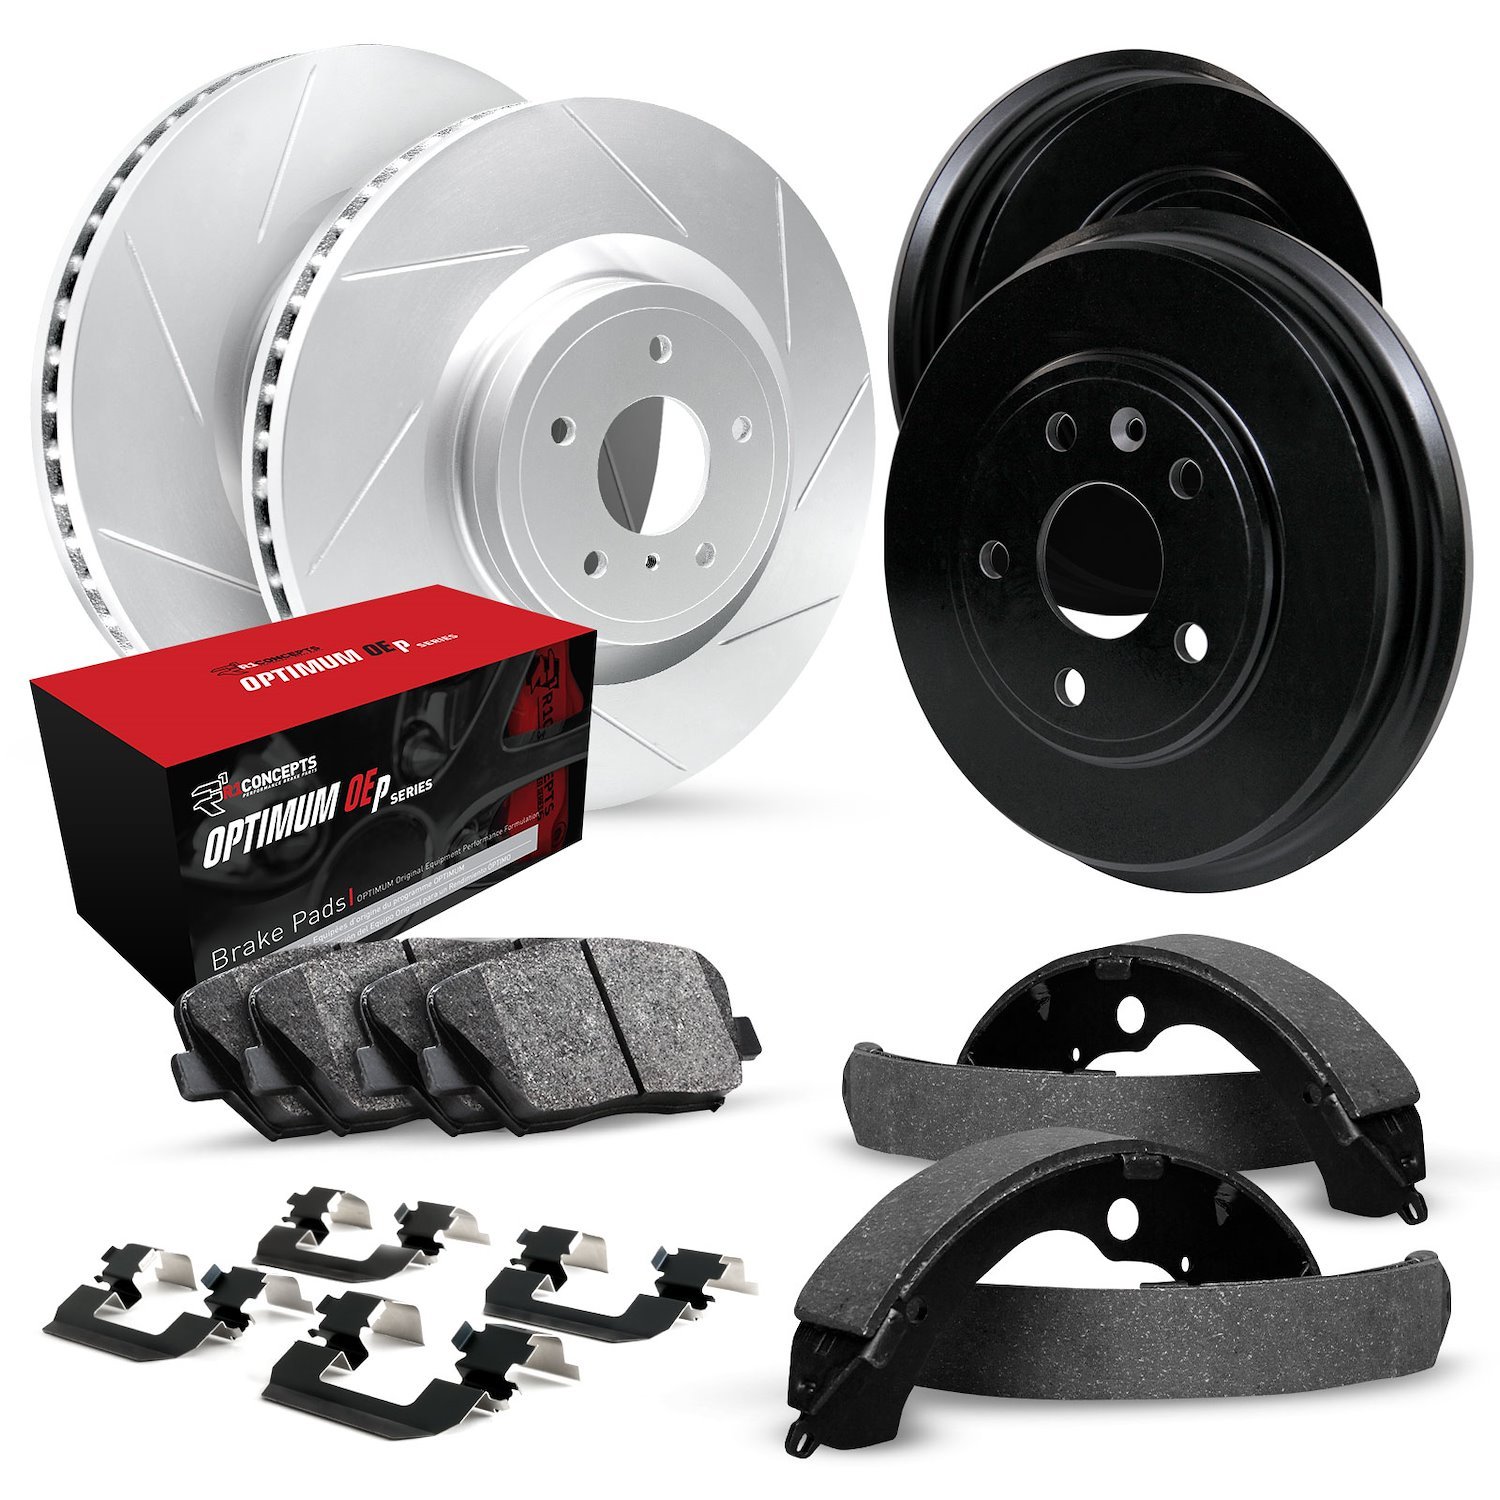 GEO-Carbon Slotted Brake Rotor & Drum Set w/Optimum OE Pads, Shoes, & Hardware, 1971-1972 GM, Position: Front & Rear